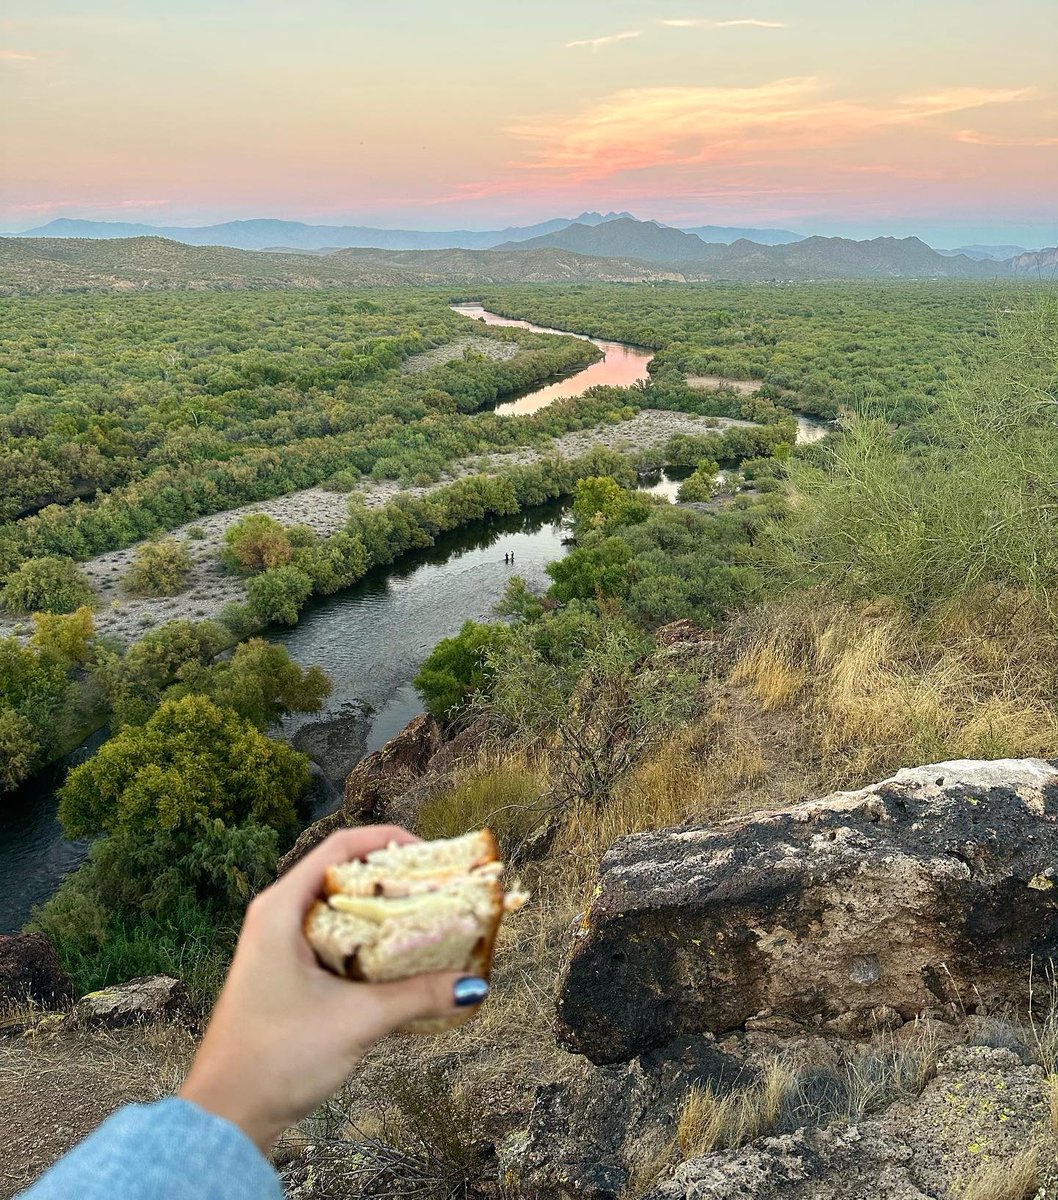 The best place we've ever eaten a sandwich. 🥪 Pack out what you pack in and #AppreciateAZ! 💪 bit.ly/43nYYBS 📍Salt River 📷: @alexa__adventure